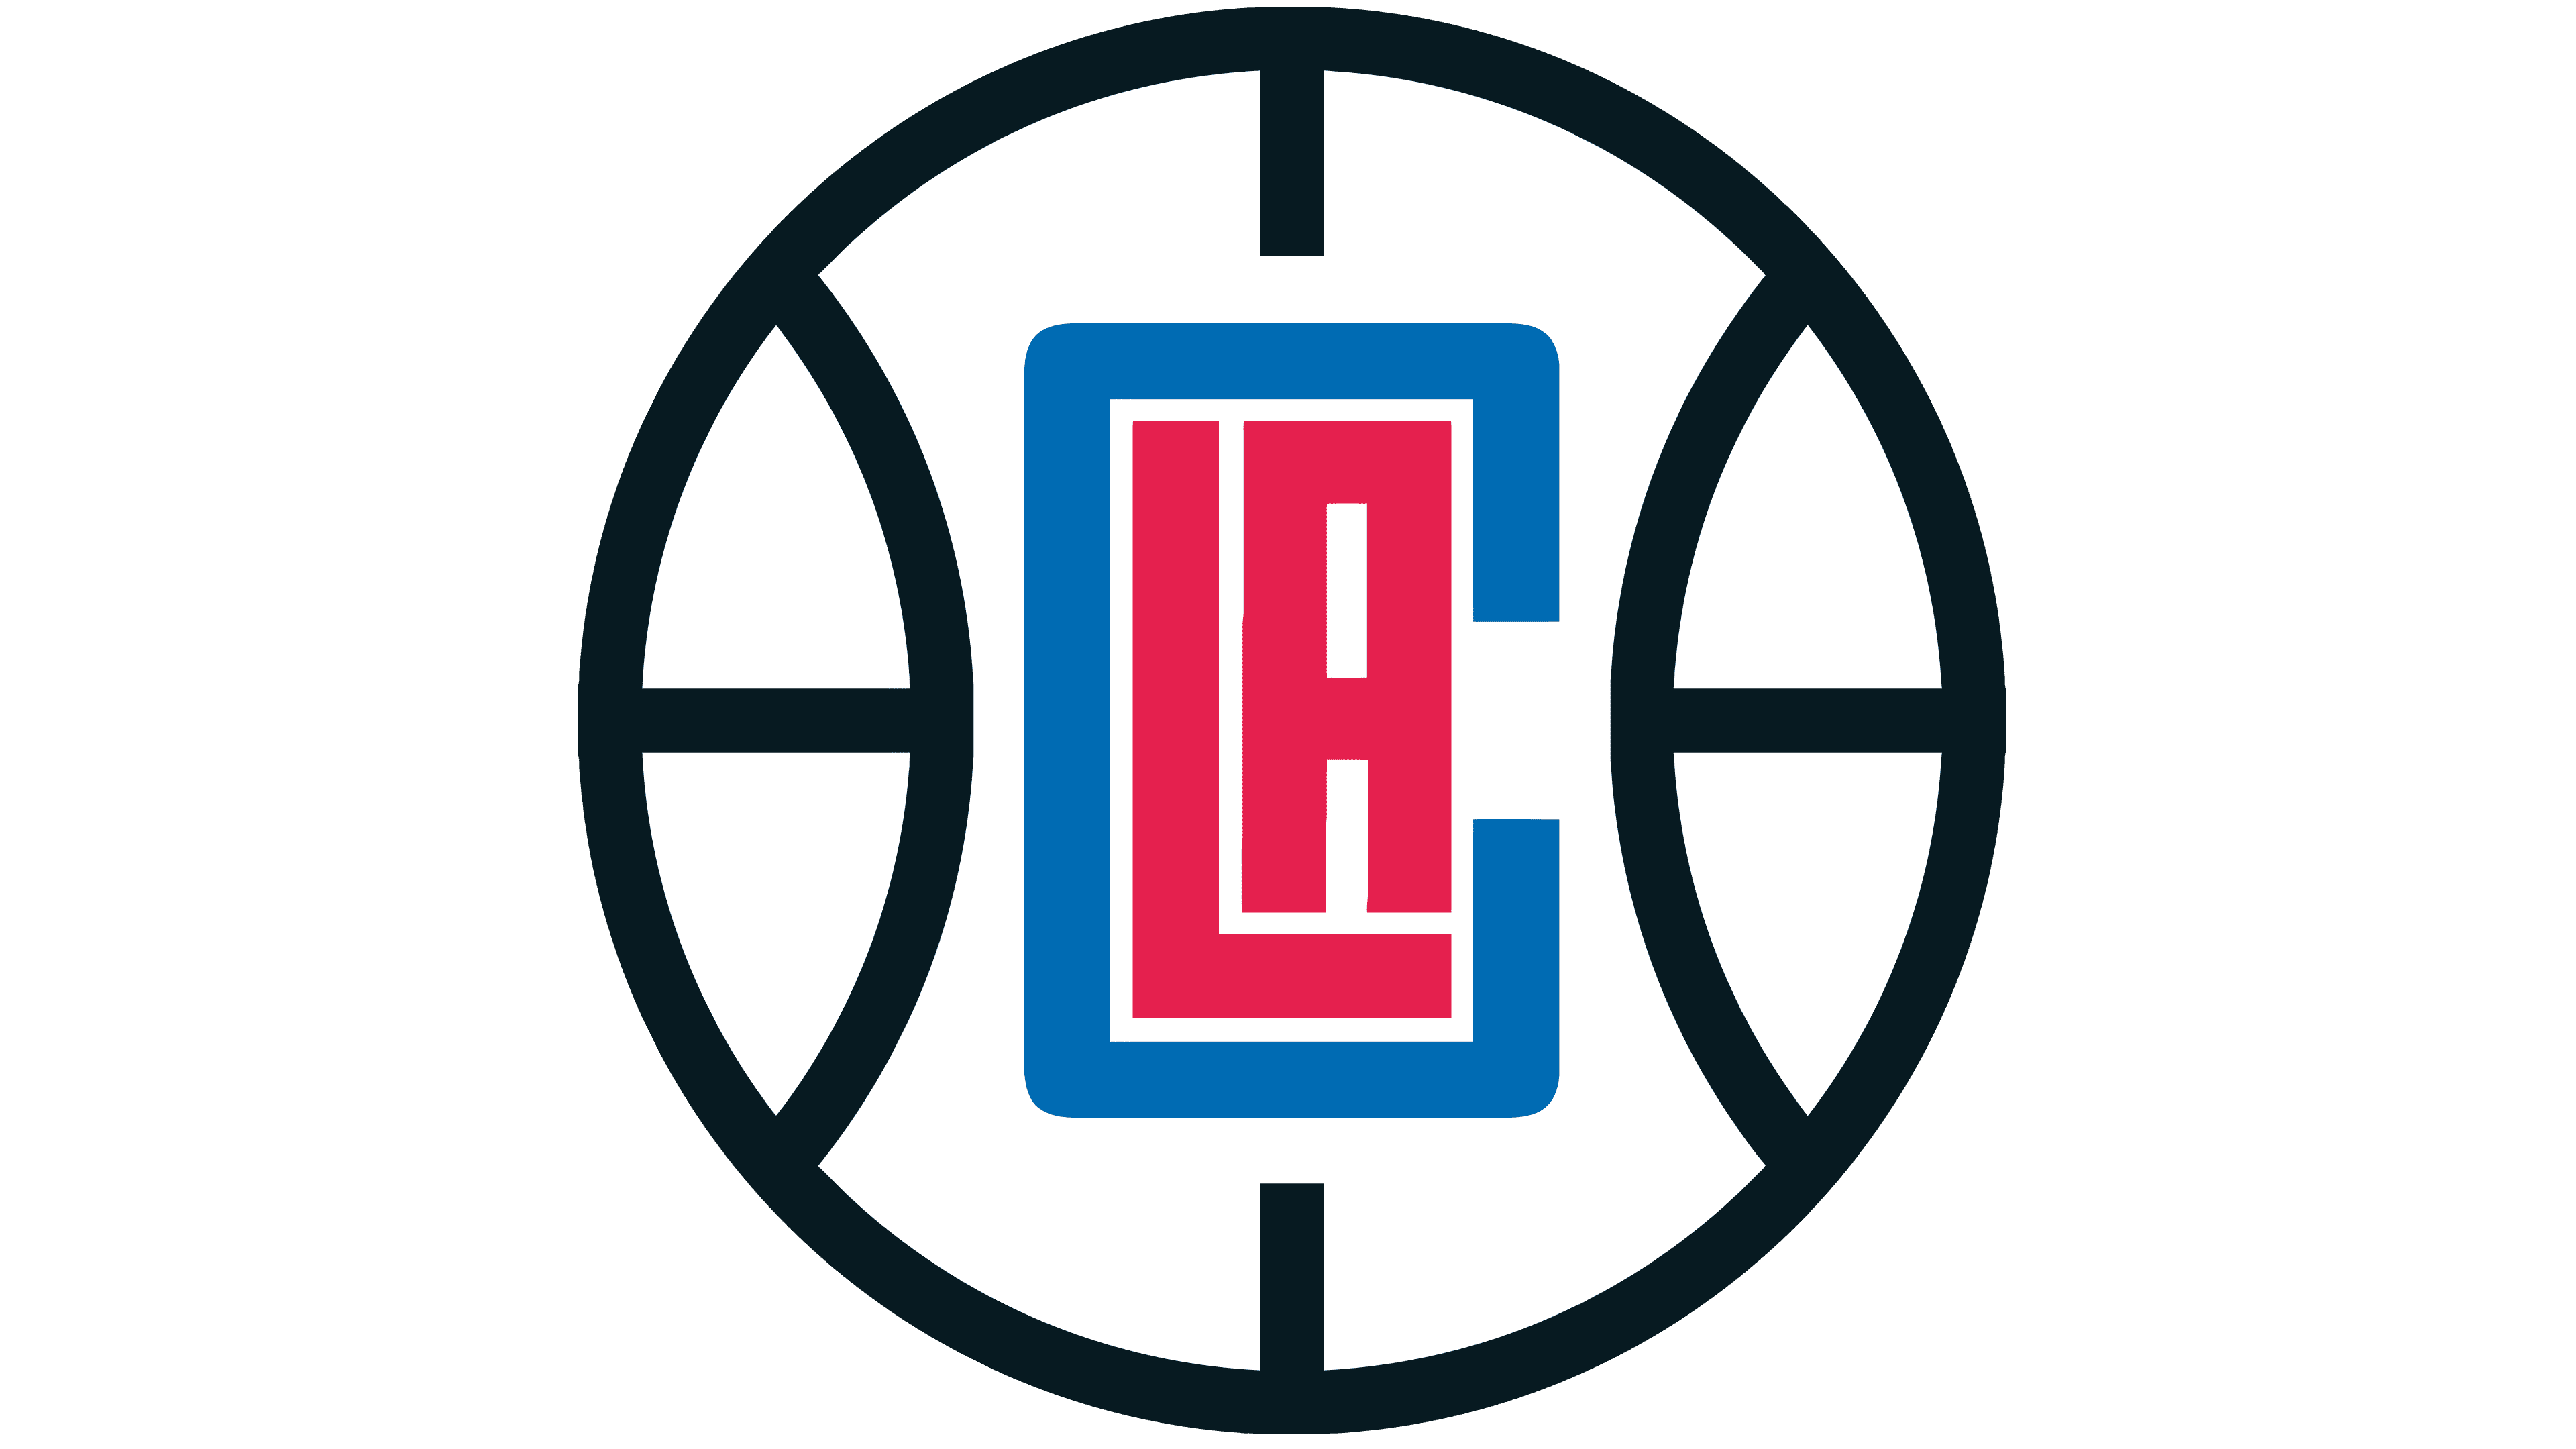 Los Angeles Clippers Logo, symbol, meaning, history, PNG, brand